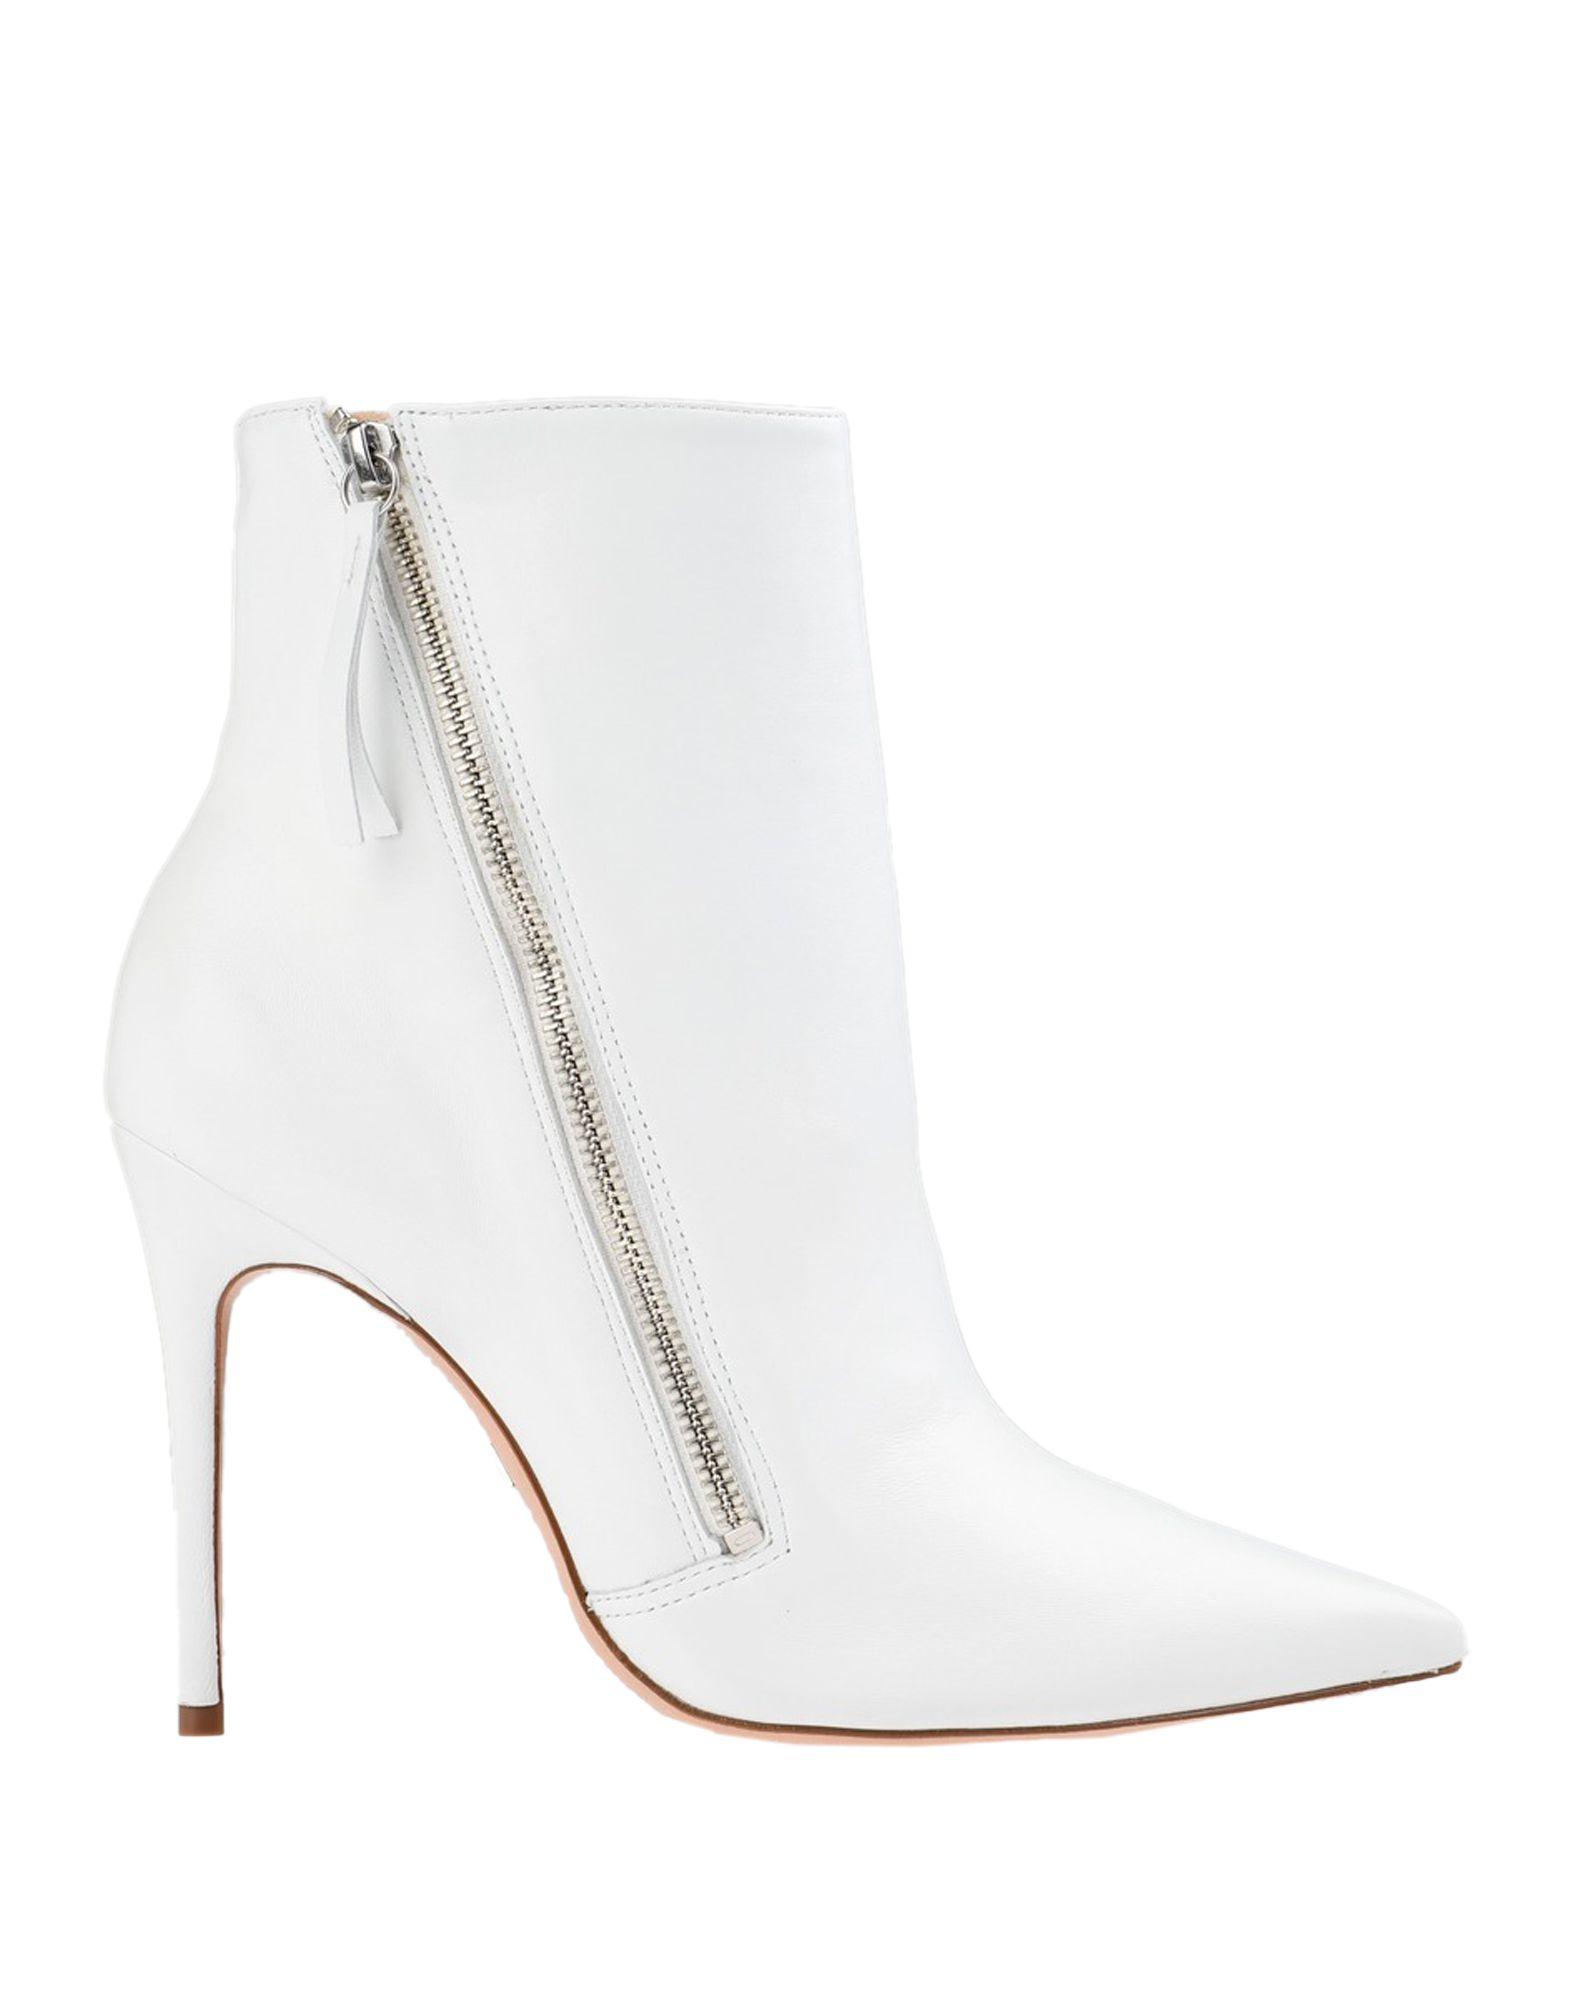 Schutz Leather Ankle Boots in White - Lyst